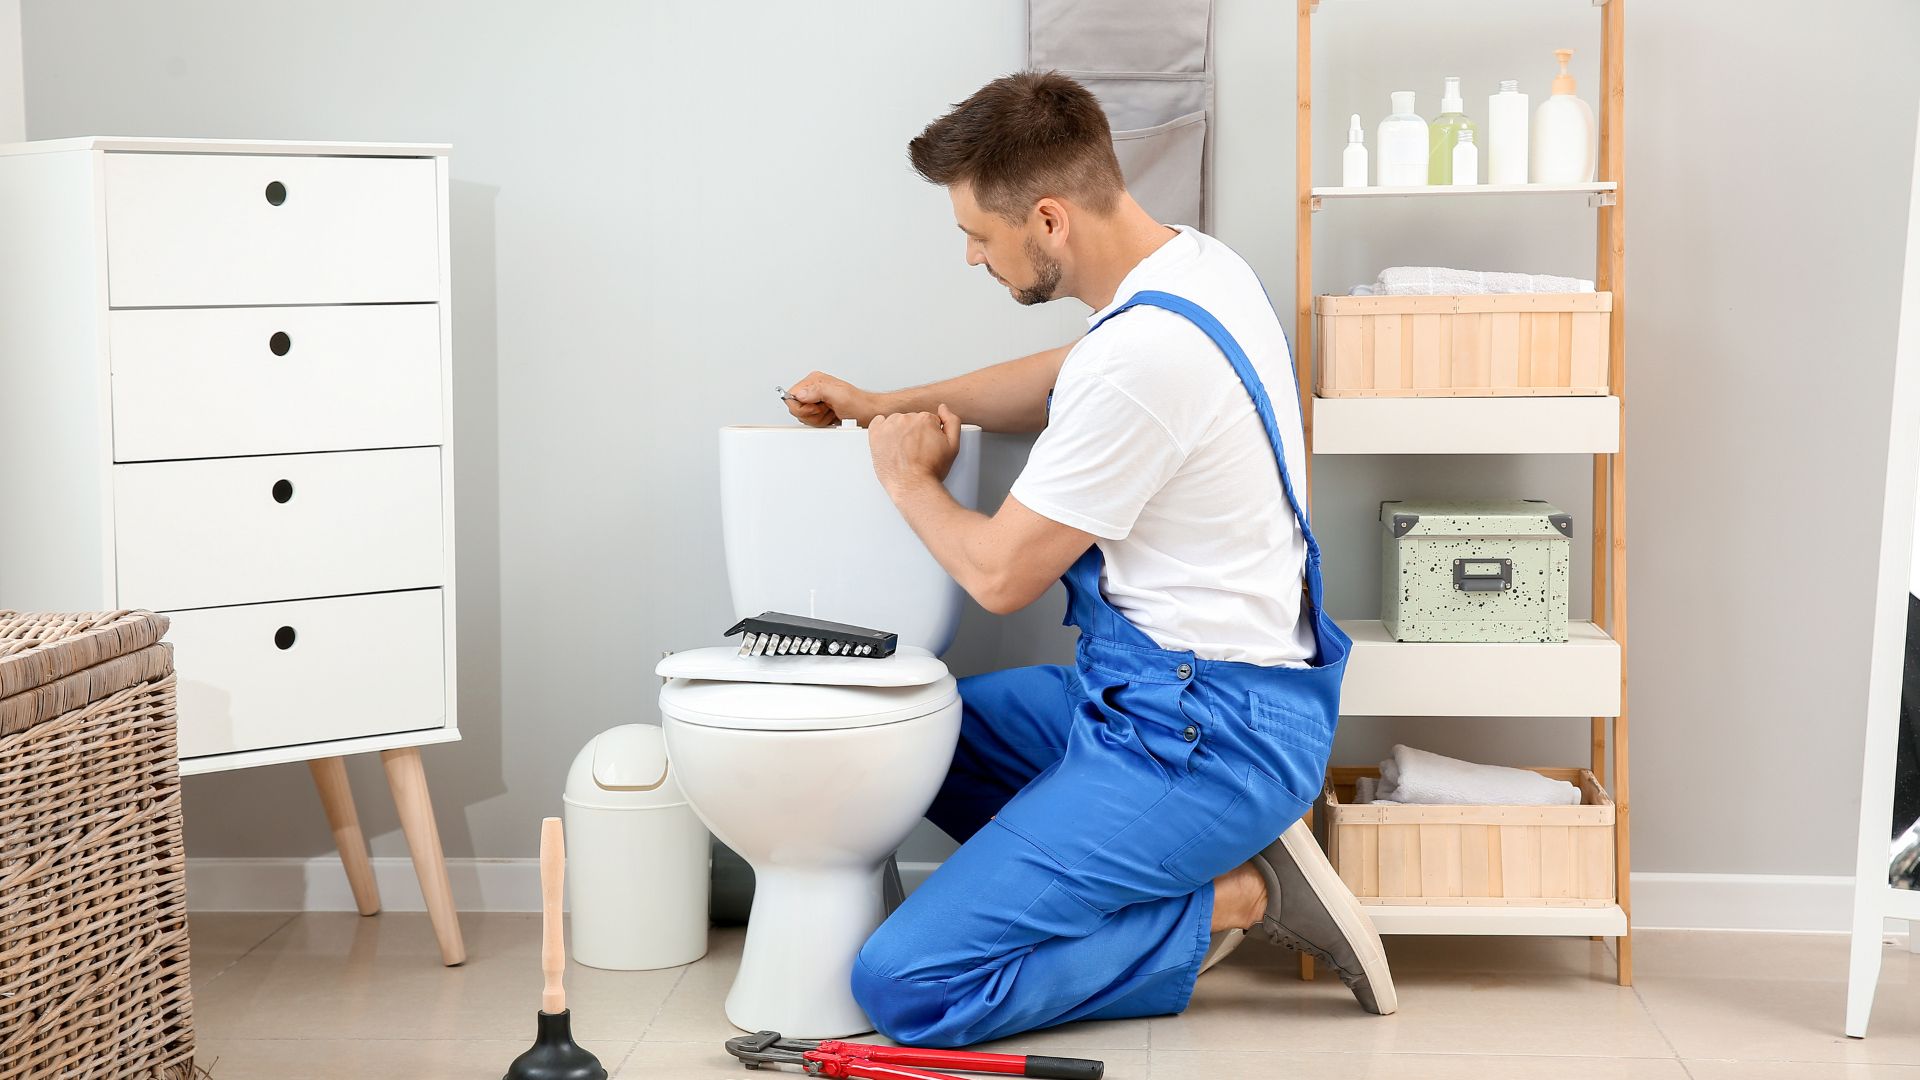 Tips for installing single flush toilets with the assistance of plumbers.